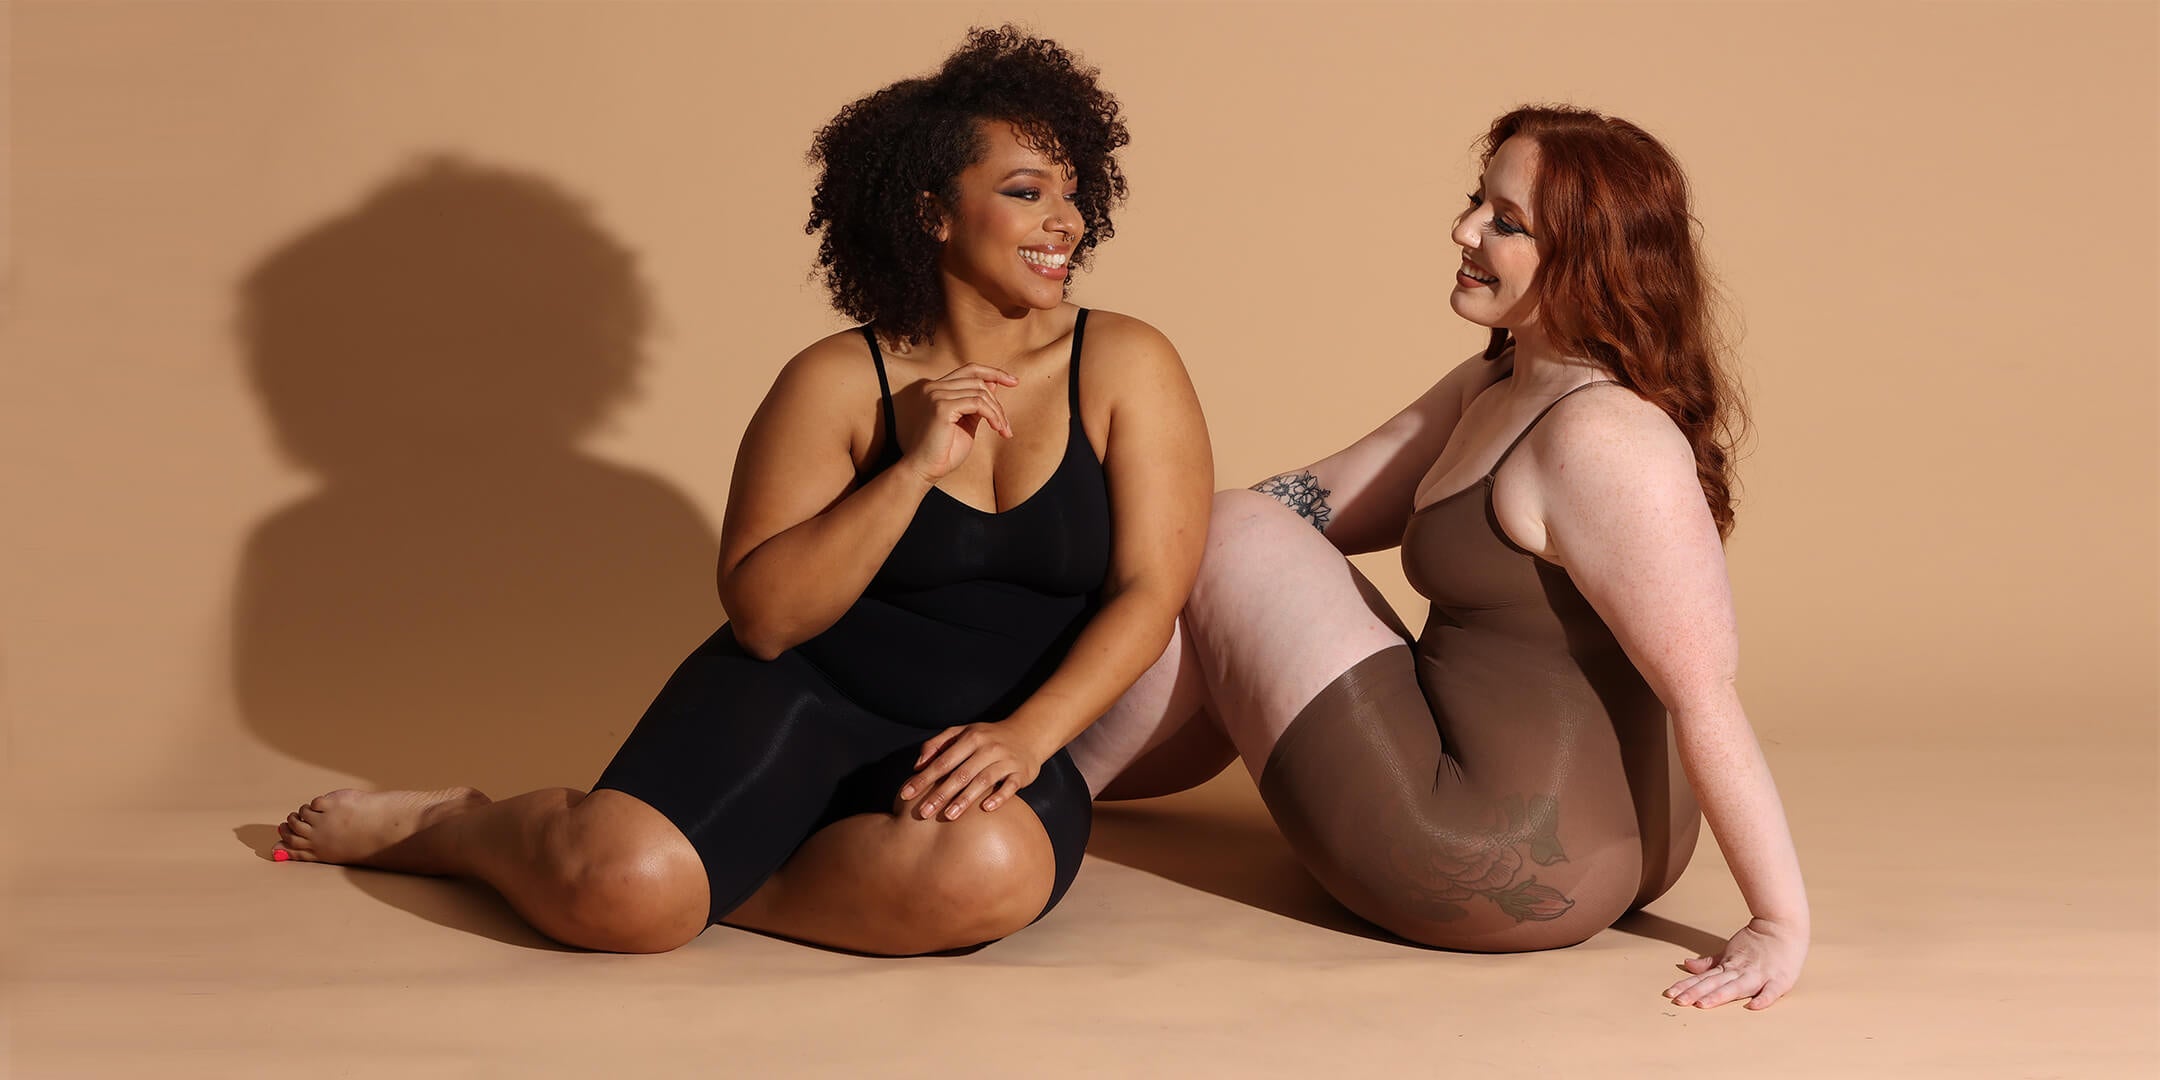 The Ultimate Guide To Selecting The Right Body Shapewear